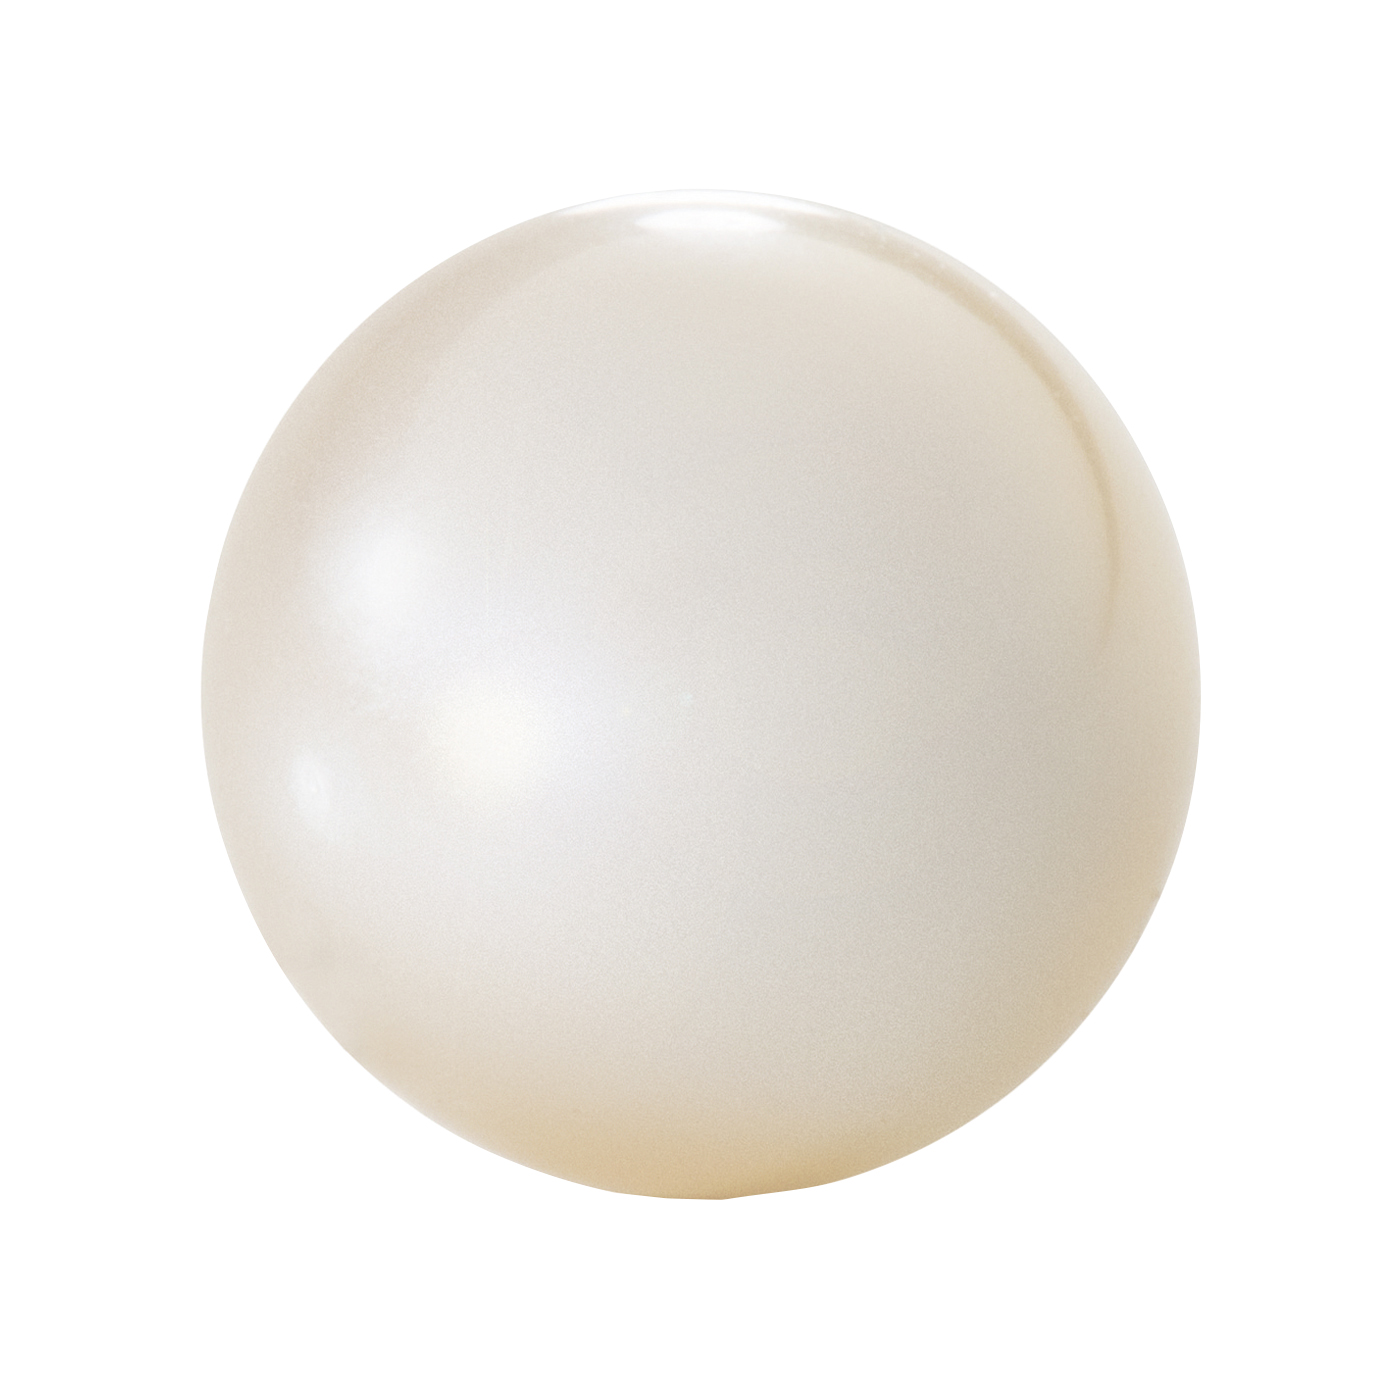 Cultured Pearl, Freshwater, 4/4, ø 4.0-4.5 mm, White - 1 piece